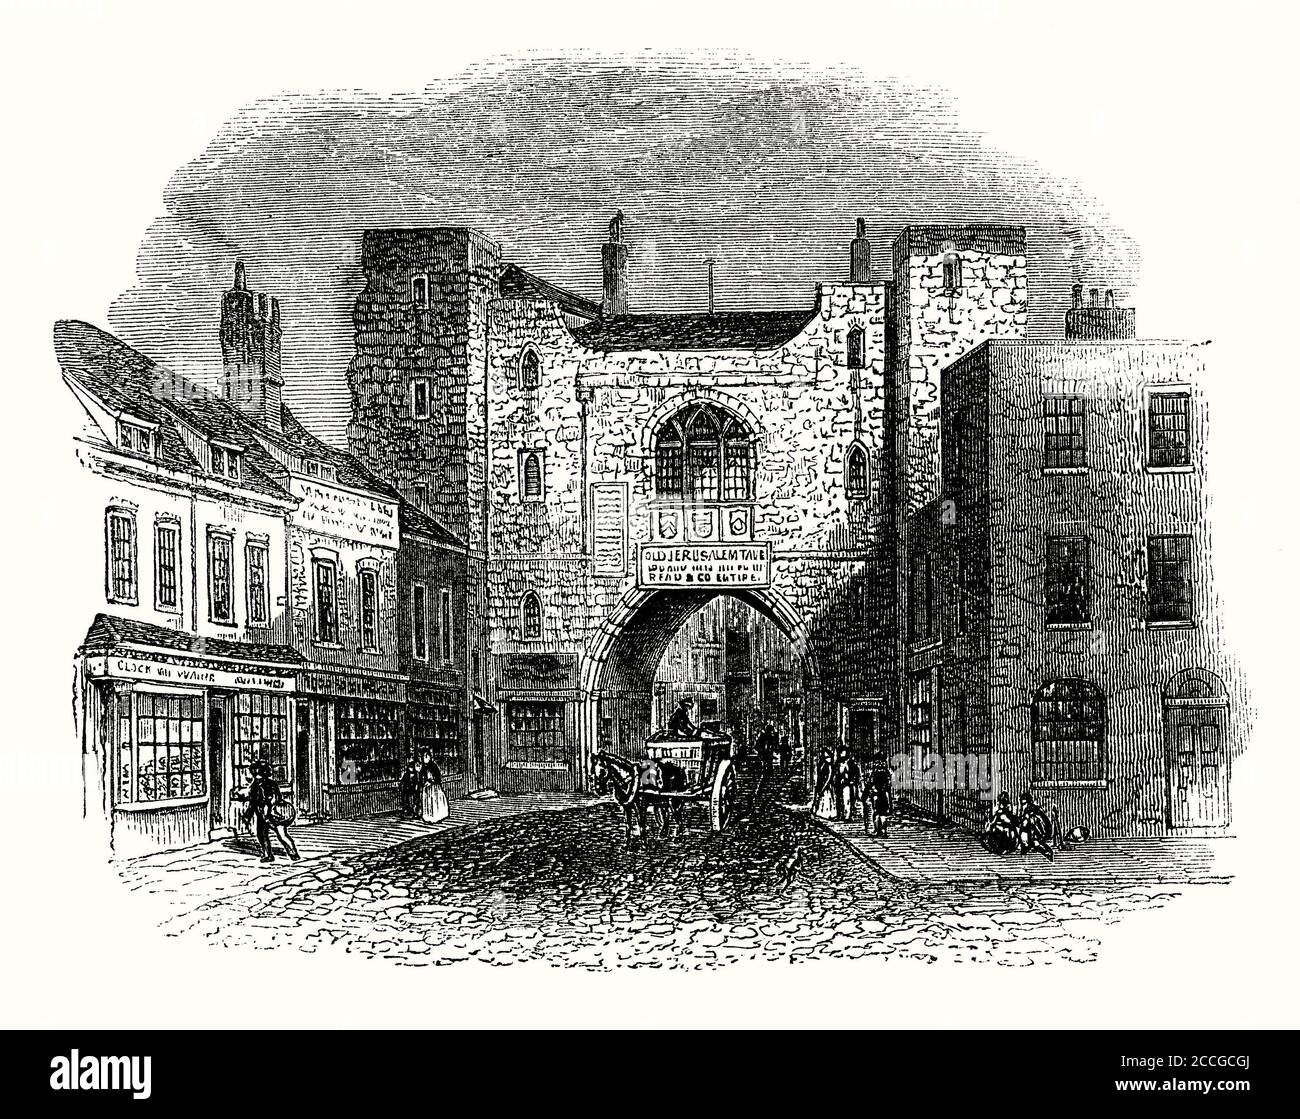 An old engraving of St John's Gate, located in St John’s Lane, Clerkenwell, Middlesex (now within central London), England, UK. It was built in 1504 by Prior Thomas Docwra as the south entrance to the inner precinct of Clerkenwell Priory, the English headquarters of the Knights of the Order of St John (known as the Knights Hospitaller). Heavily restored in the 19th century, the Gate standing today is mainly a Victorian recreation. The Museum of the Order of St John is housed within St John’s Gate. Stock Photo